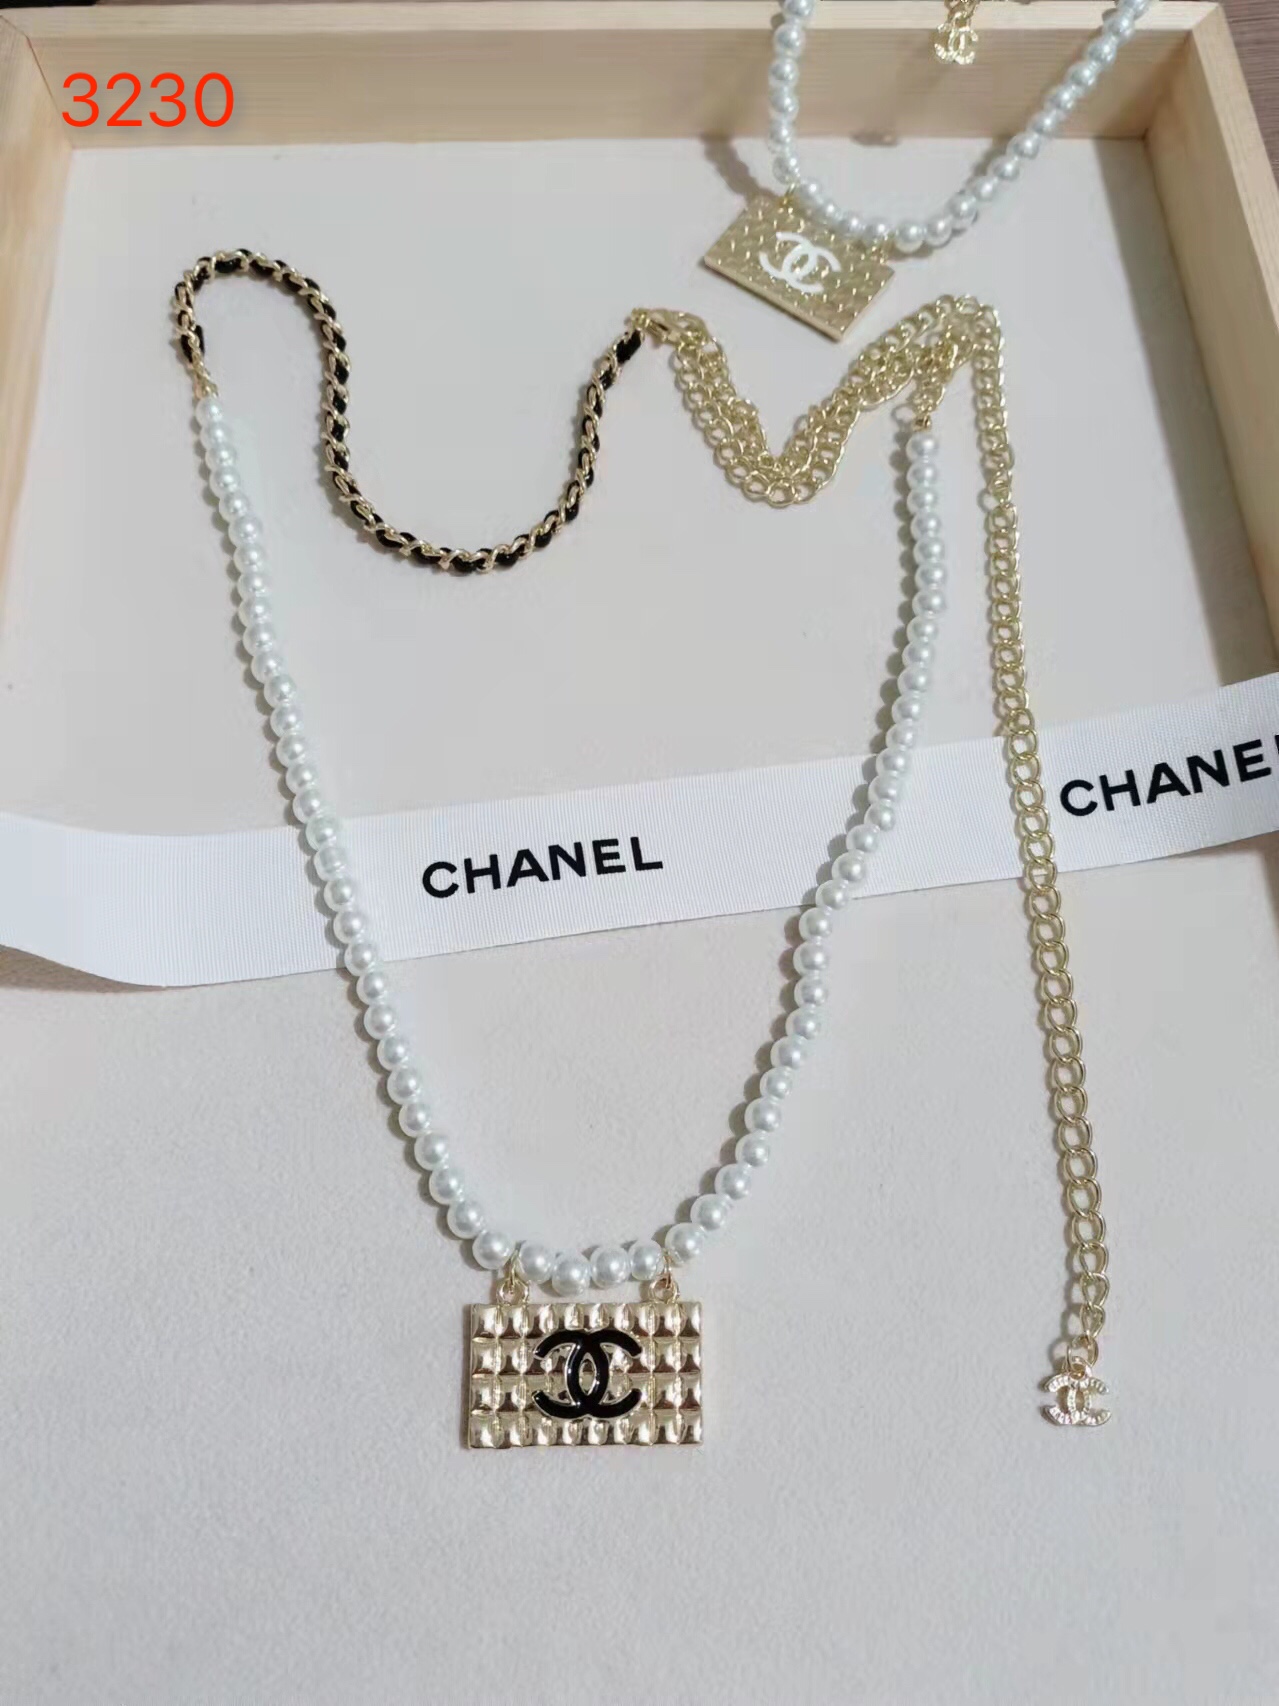 Chanel necklace 109141